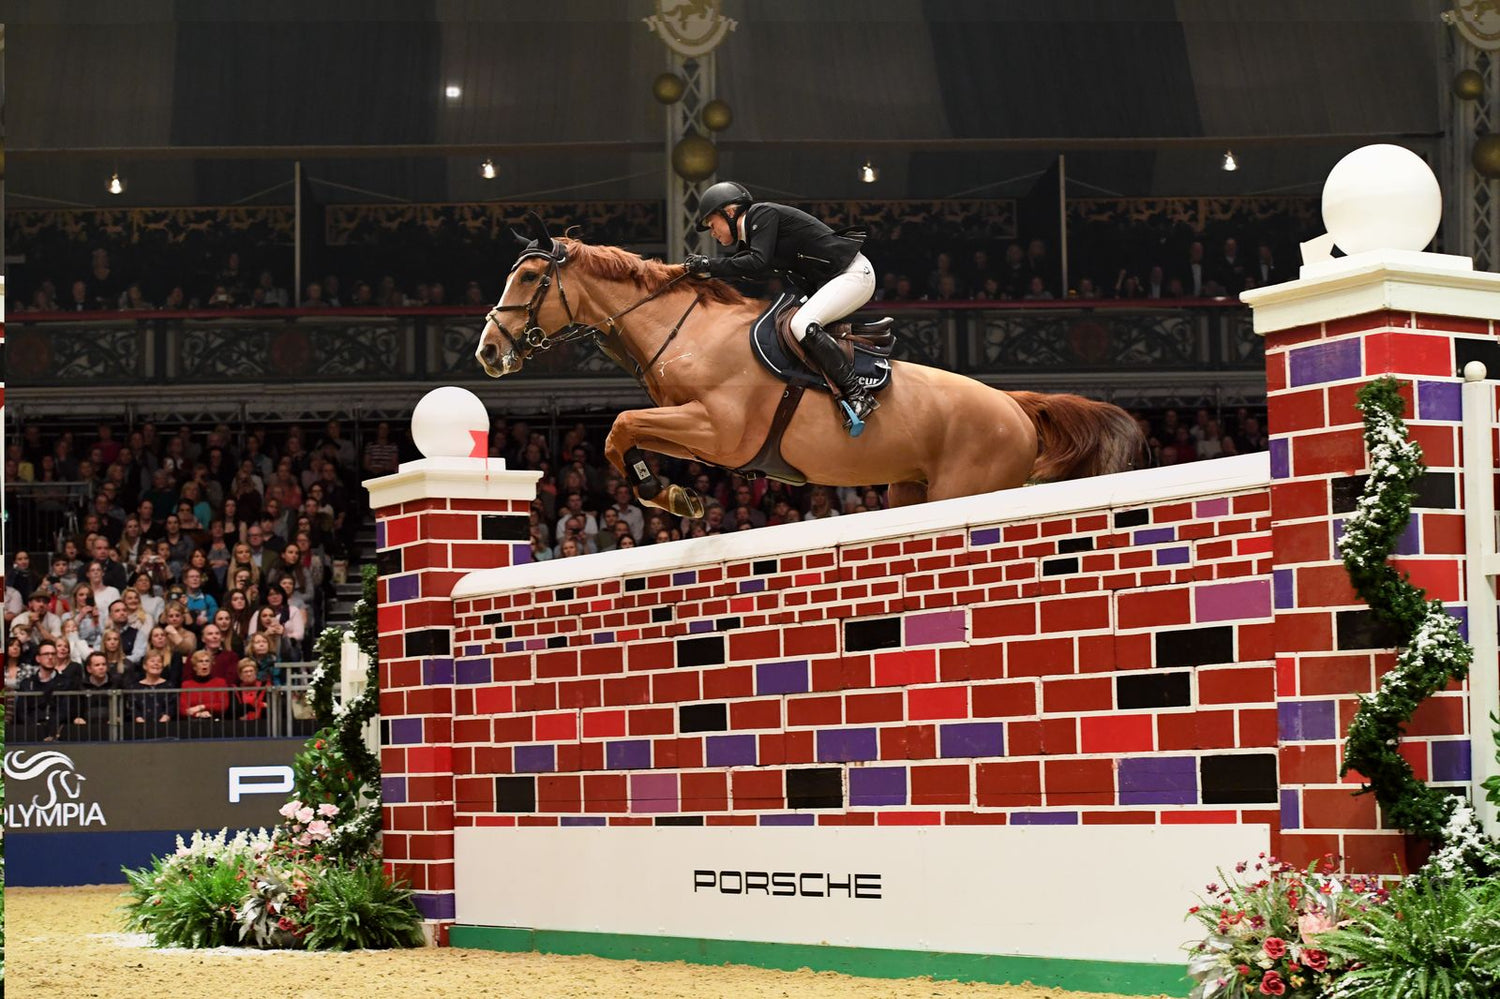 London International or Olympia Horse Show: The Definitive Guide